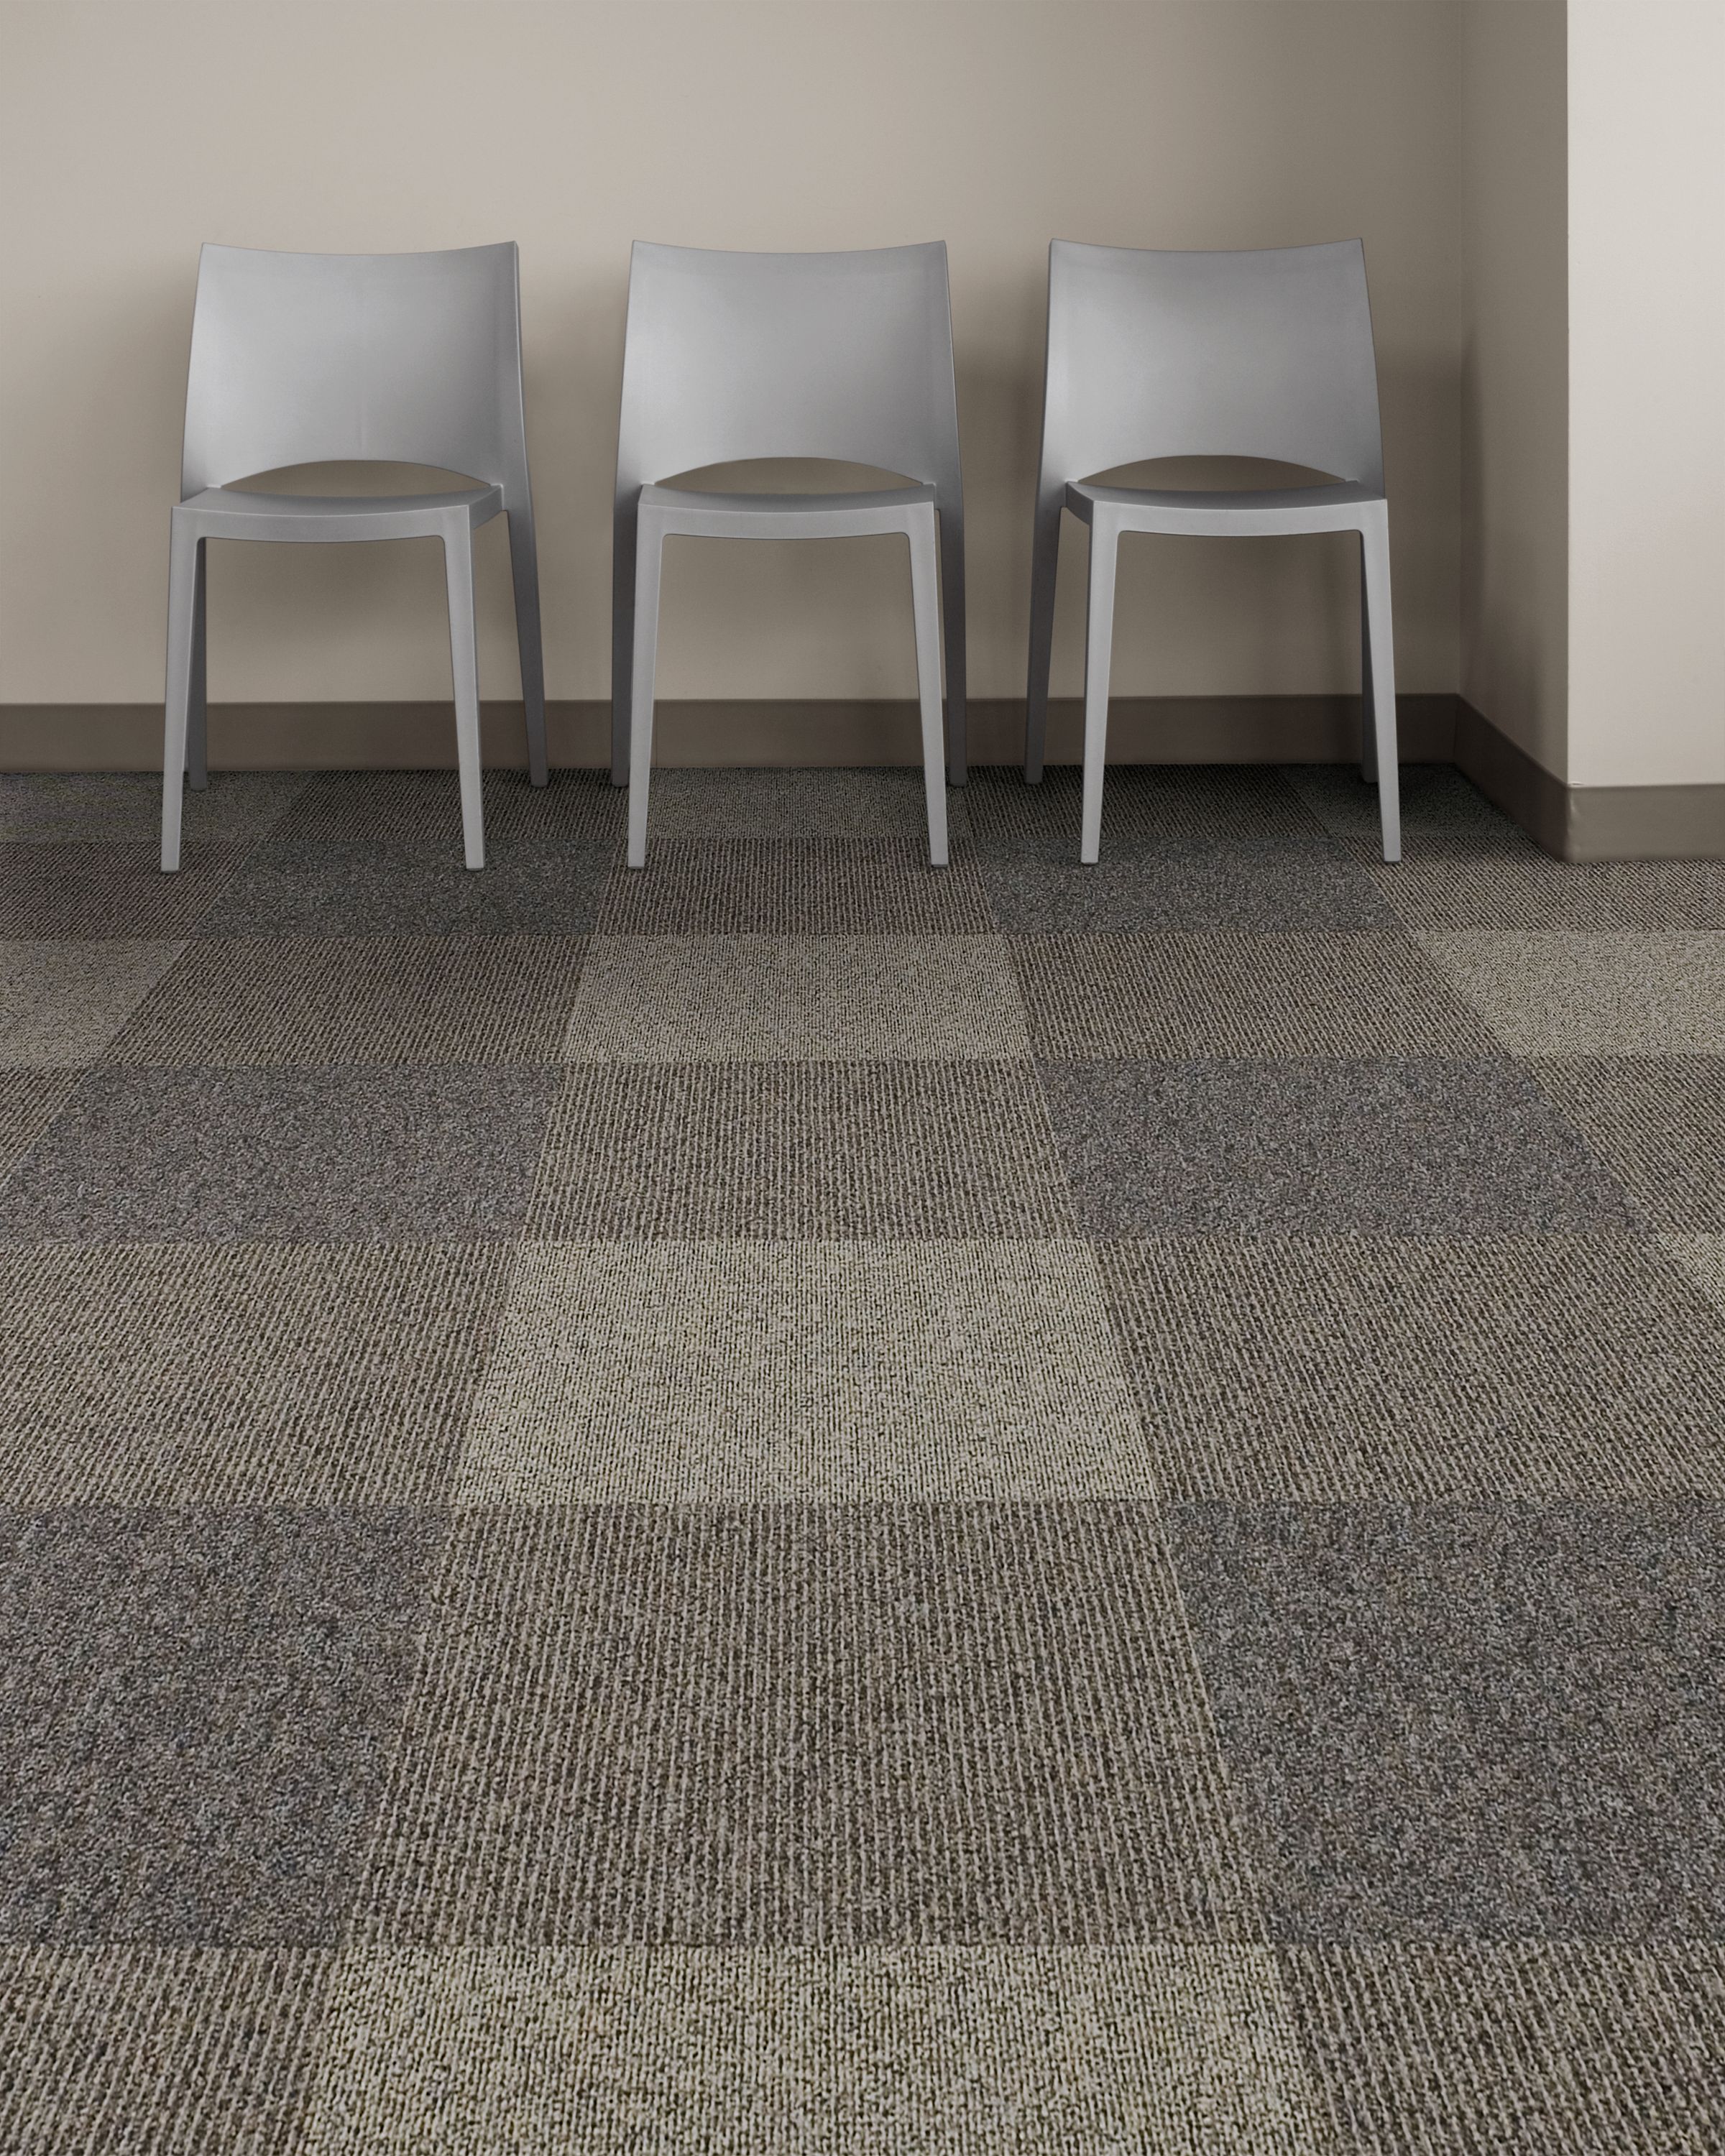 Interface Broomed, Grooved and Brushed carpet tile in room with three chairs image number 7